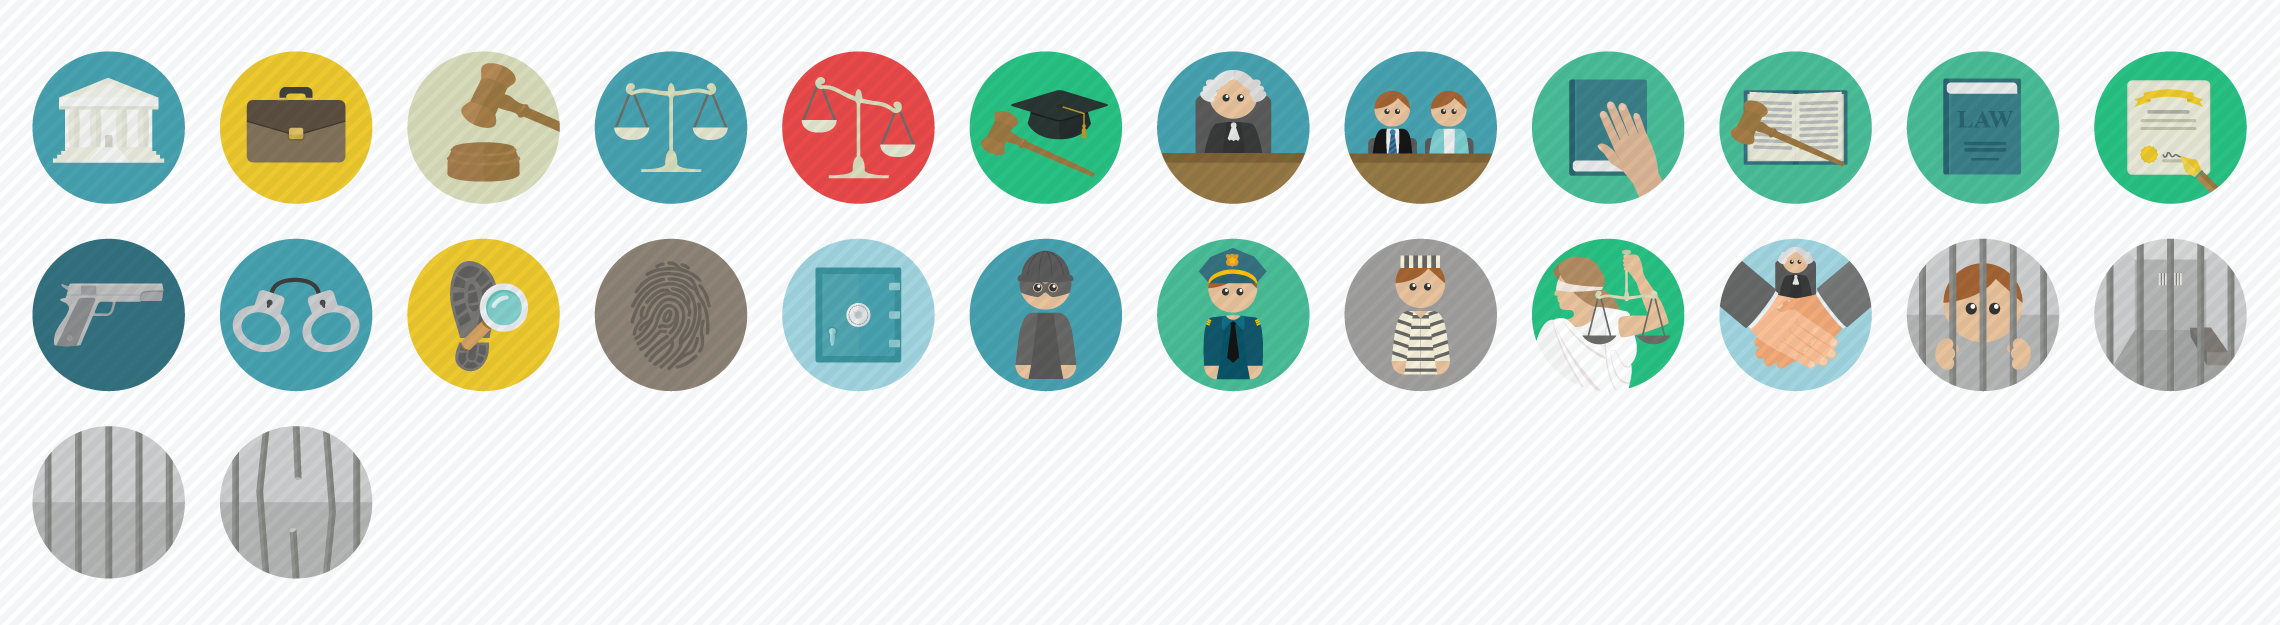 Law_Justice_Court_Flat_Icons